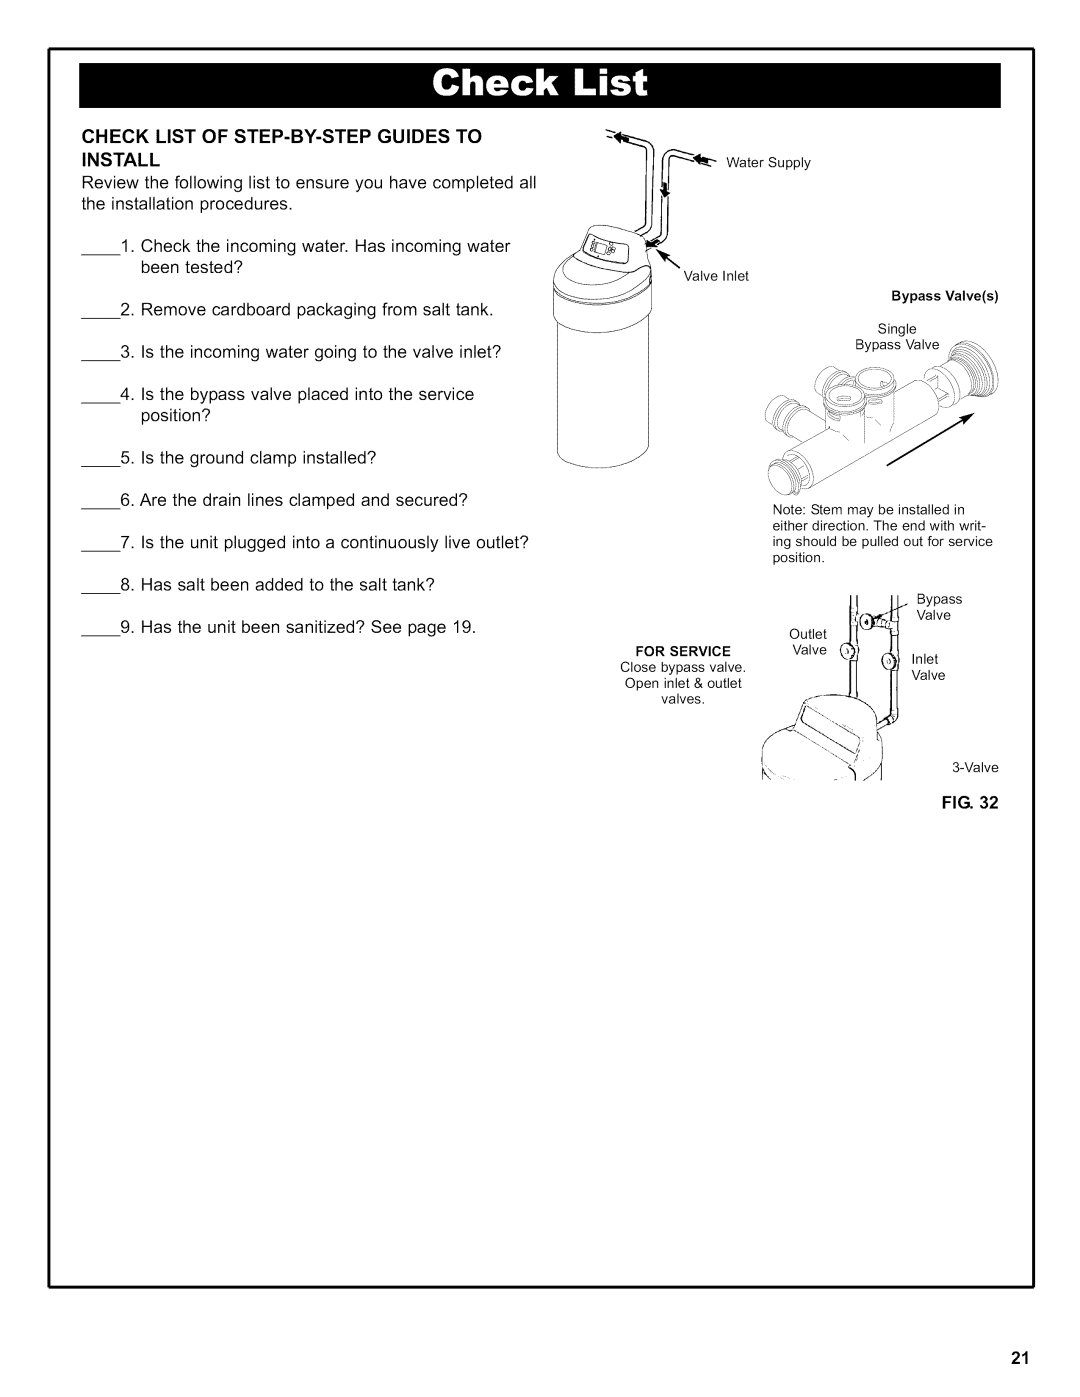 Kenmore 625.38376 owner manual Check List Of Step-By-Step Guides To Install 